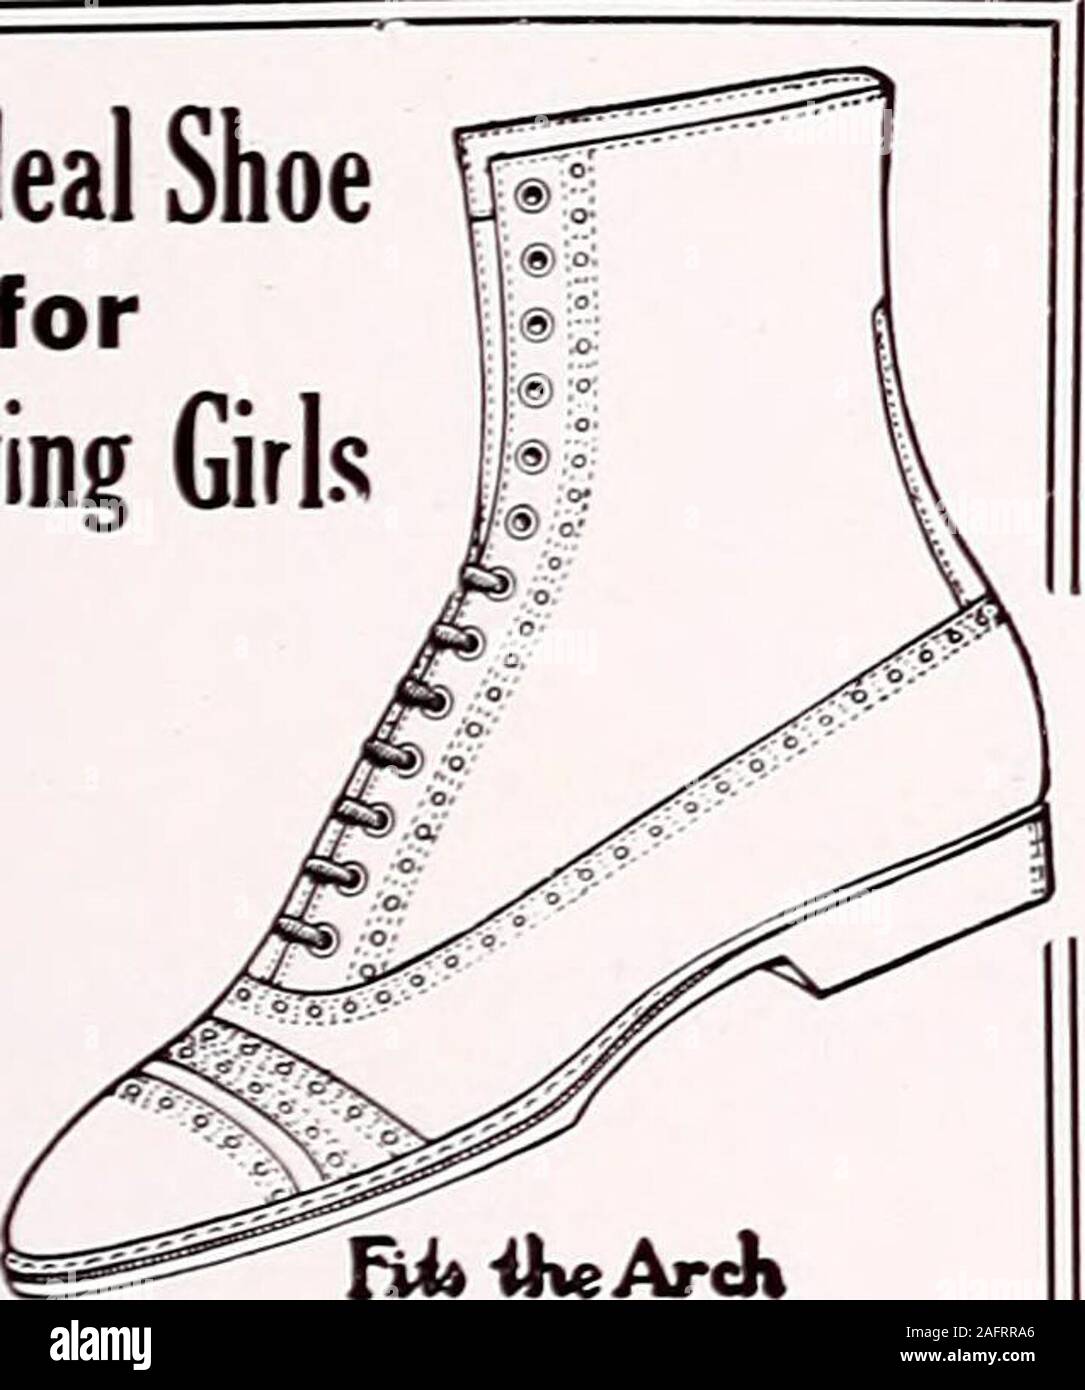 . Poly, The. AUTOMOBILES GASOLINE -- SUPPLIES -- TIRESSERVICE TO FORD AND OVERLAND OWNERS AUTO DEPARTMENT423 N. BROADWAY MAIN OFFICE424 N. 27 ST. An Ideal Shoe for Growing Girls X i a zH. F-U* ike ArcK An ideal shoe for growing girls. Hasstyle, looks, wear, quality, everything.Of black Russian calf, saddled withleather over top, and white ivory weltsole. Comfortable and smart, at $4.00 VII SHOE FY 99 ARRISON kEENECO?0 If It Comes From The Toggery // Must Be Good â¢â¢â¢ TAILORING CLOTHING FURNISHING â63â Fragments Gathered from the Rim Rocks 99 Fashions for 1916 say that women shall become fur- Stock Photo